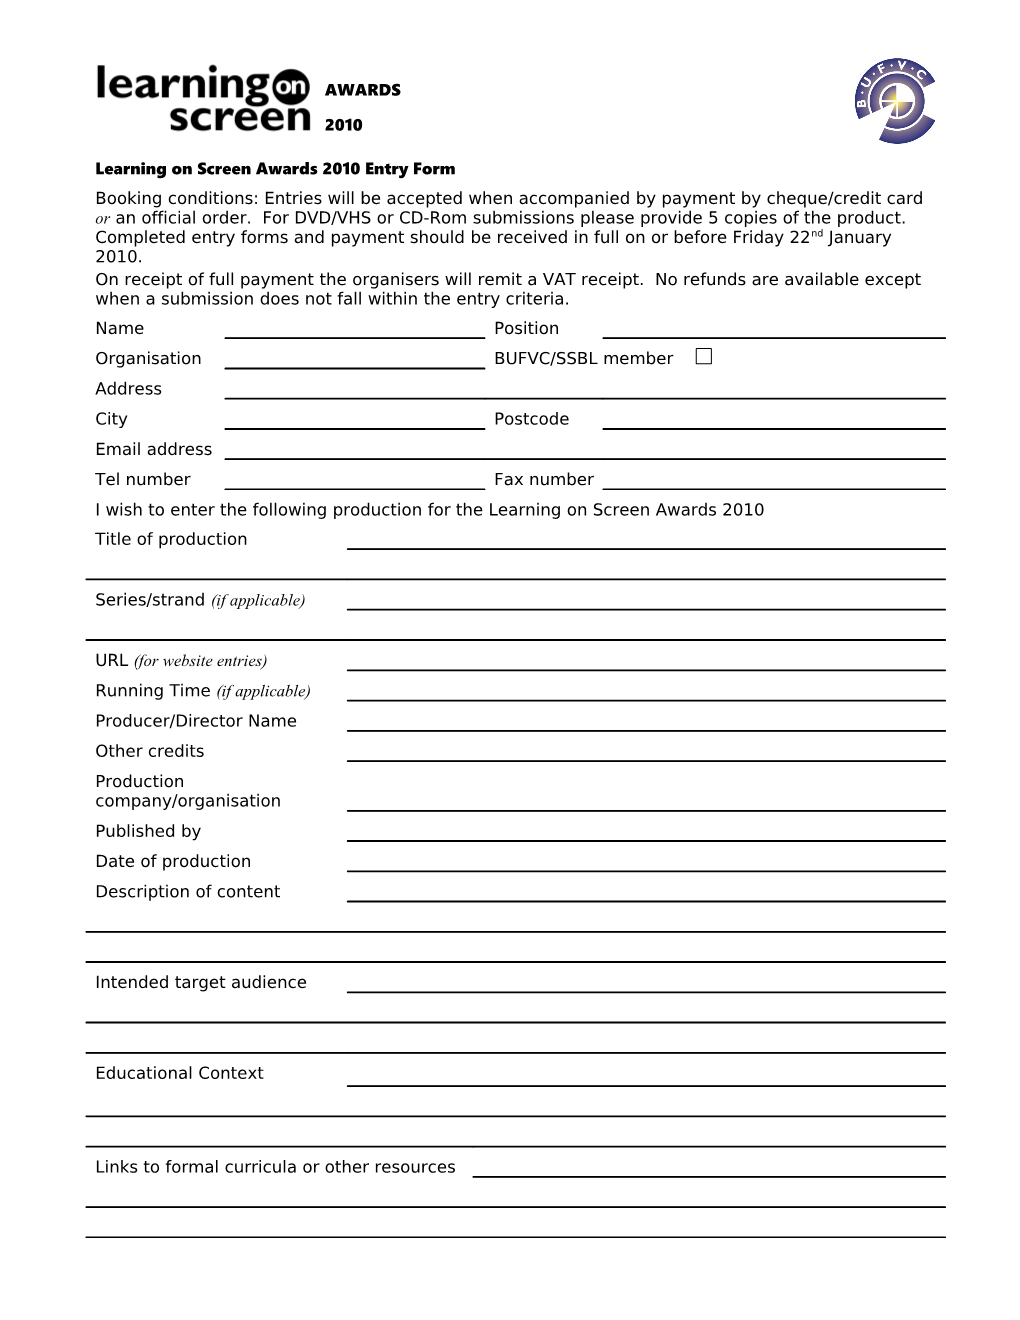 Learning on Screen Awards 2010 Entry Form